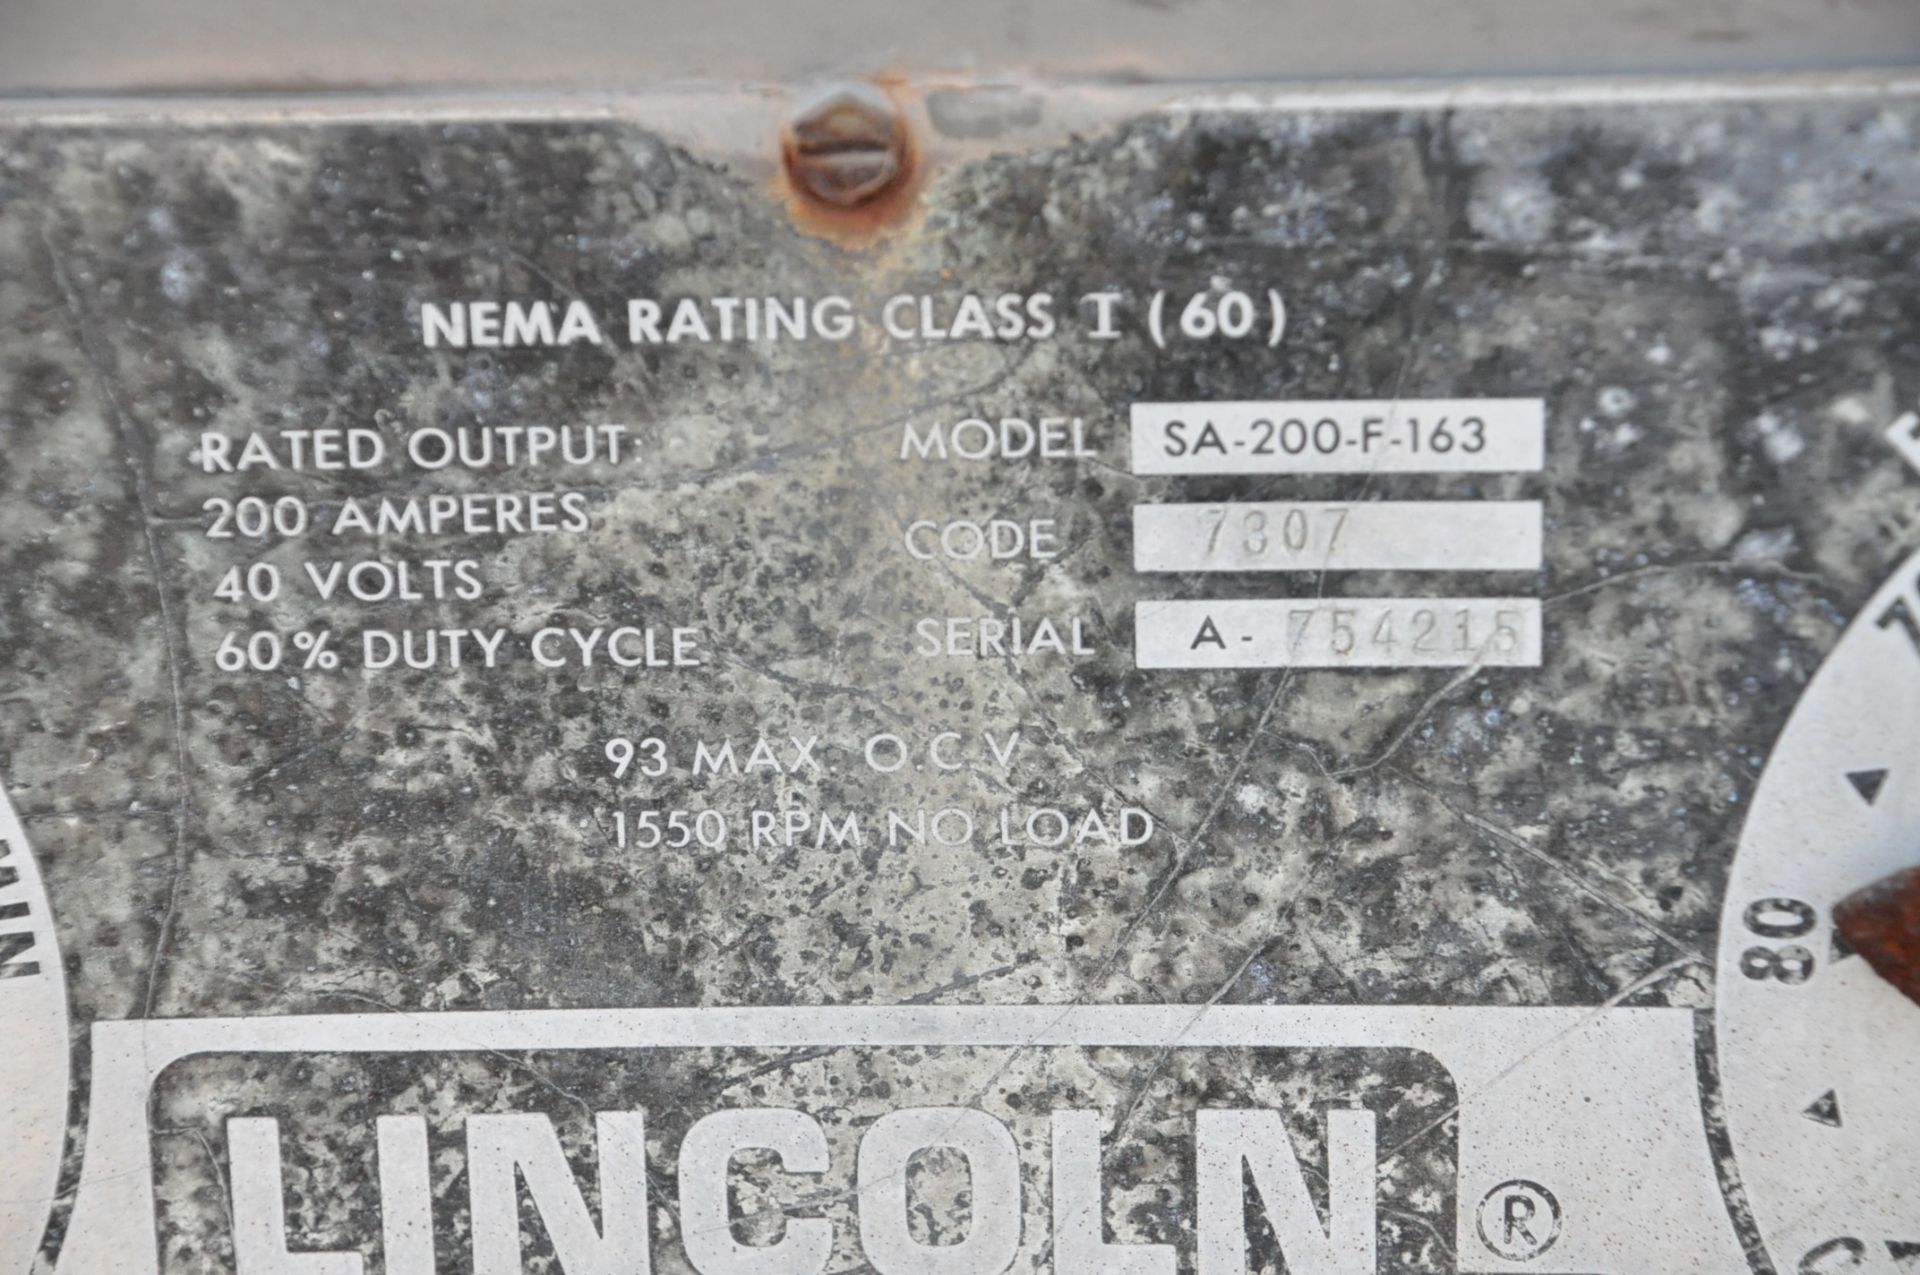 Lincoln Model SA-200, 200-Amp Capacity DC Arc Welder Power Source, S/n A754235, Diesel Engine - Image 4 of 4